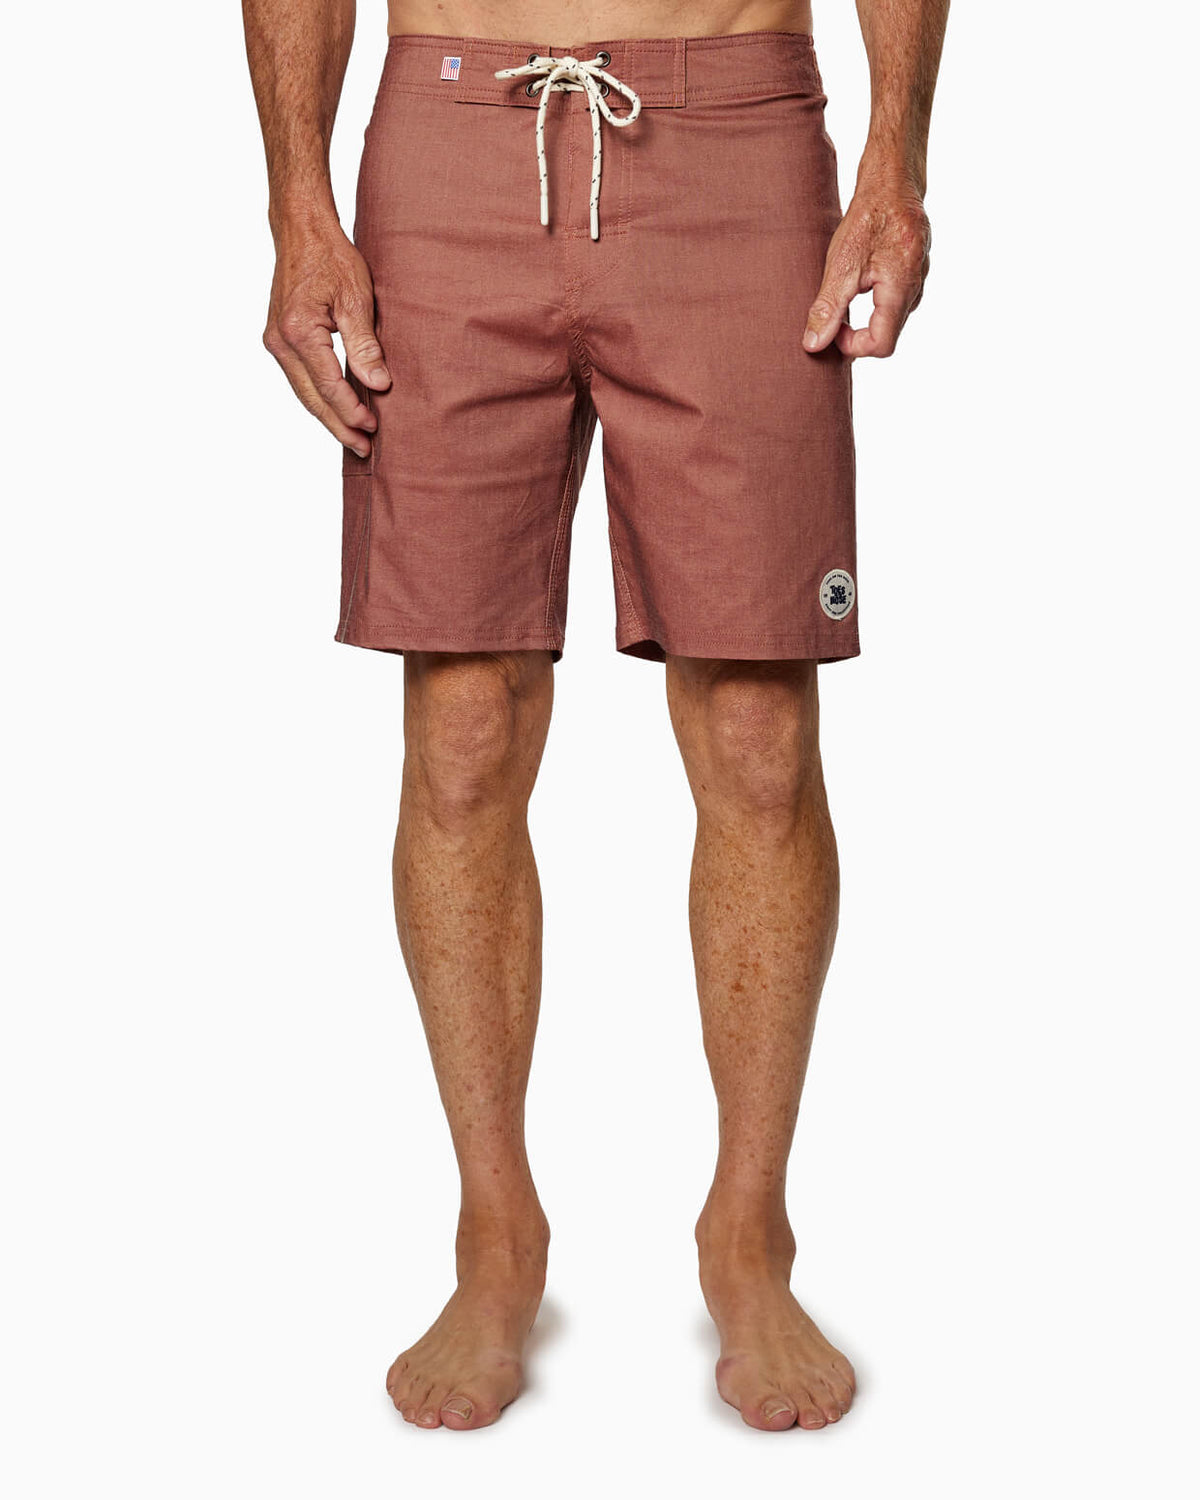 Session Boardshort | Sixty One Collection SESSION SPICE front #color_session spice